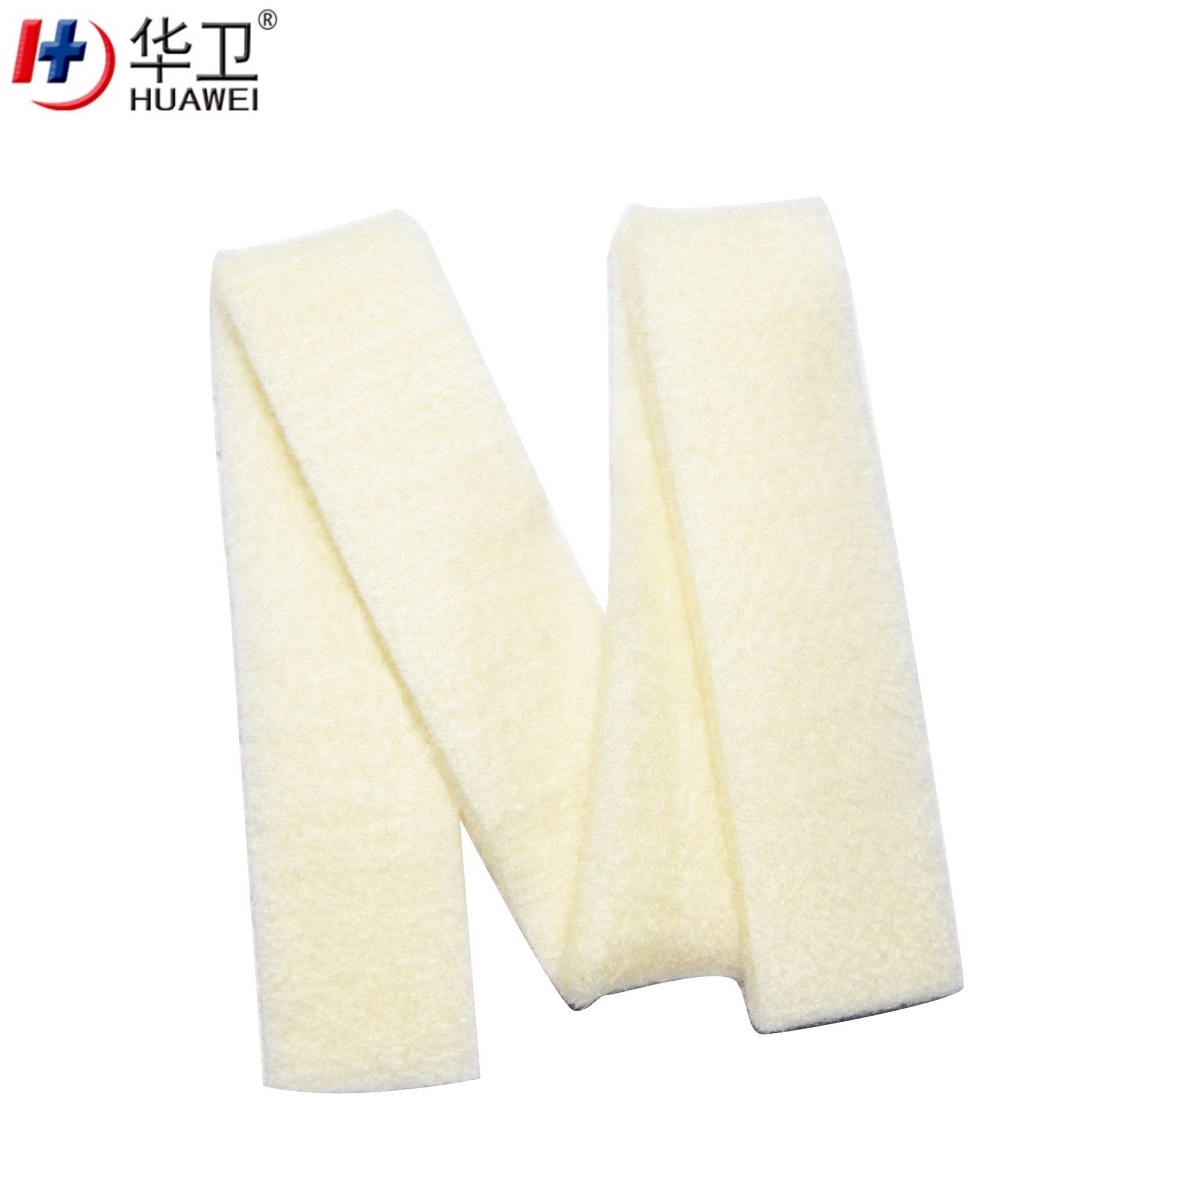 Huawei excellent advanced wound care dressings with good price for patients-2